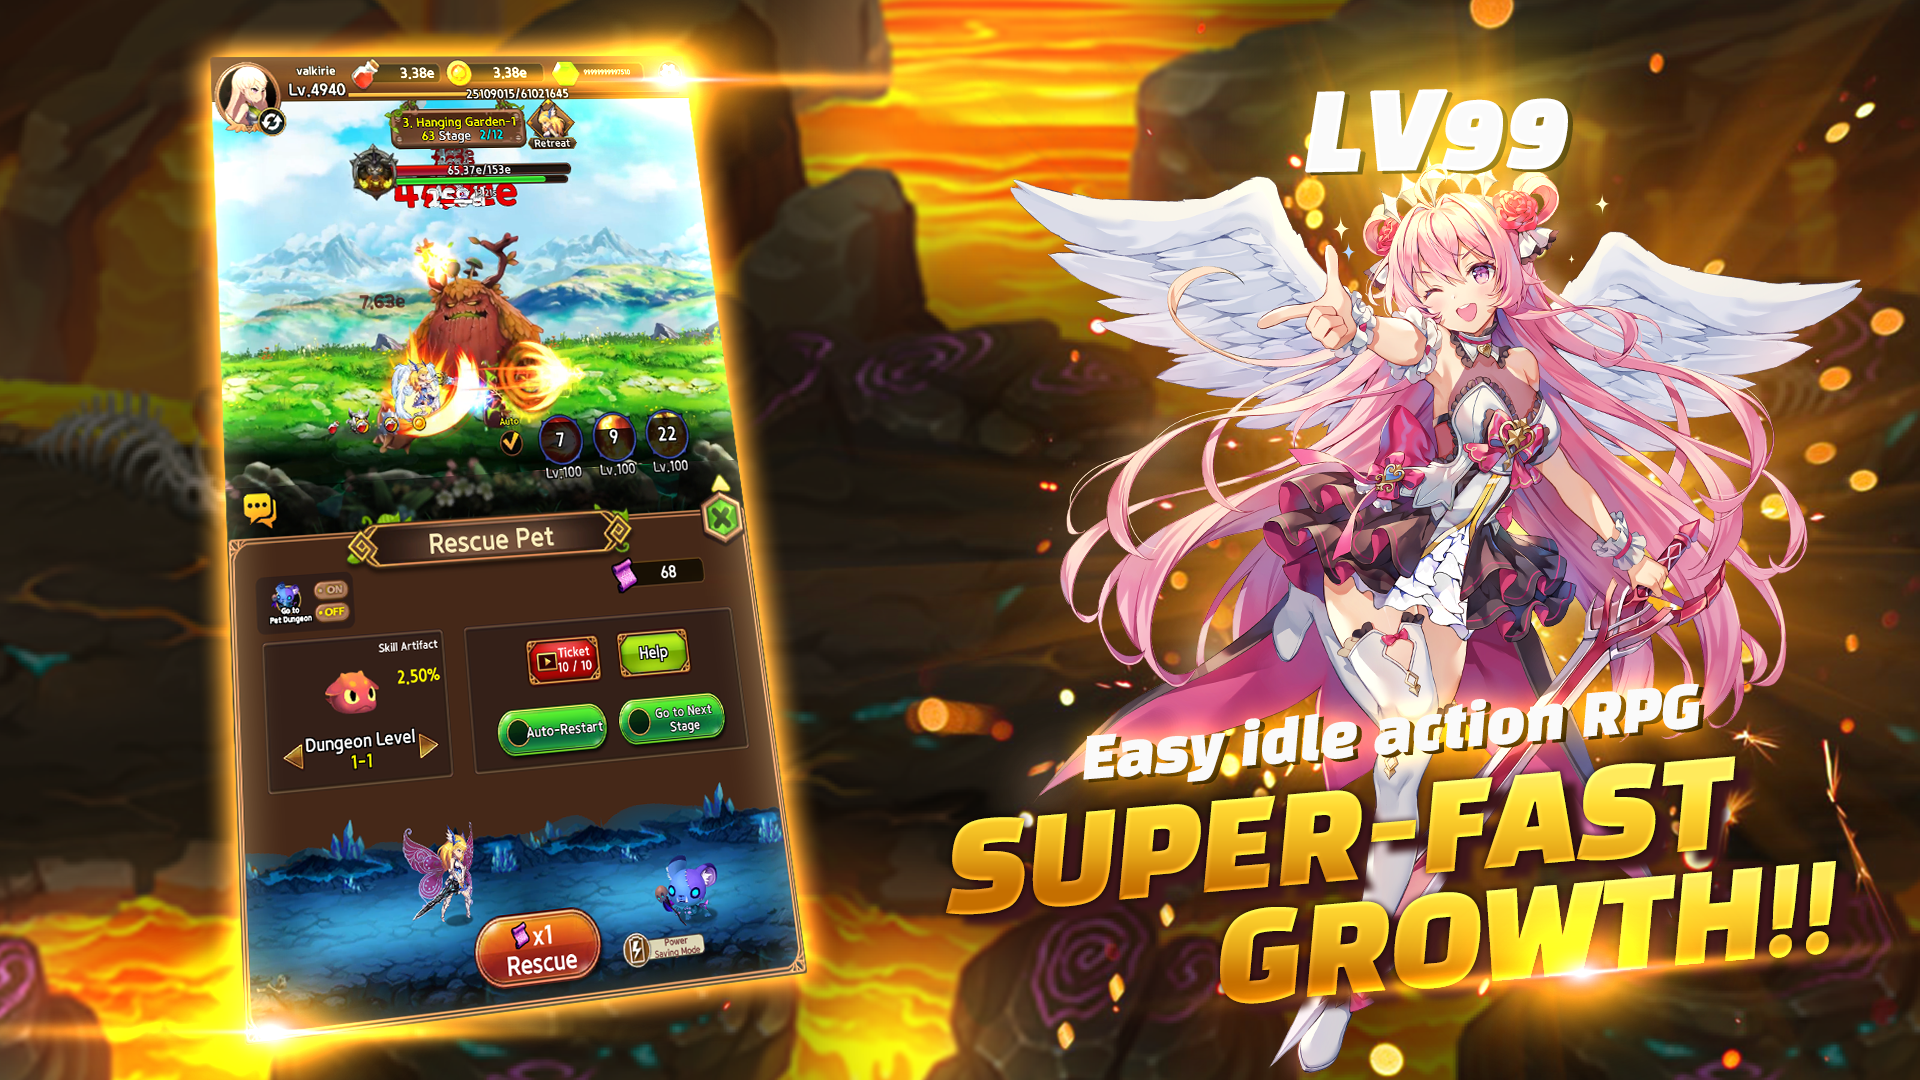 Screenshot 1 of រឿង Valkyrie៖ Idle RPG 1.28.4